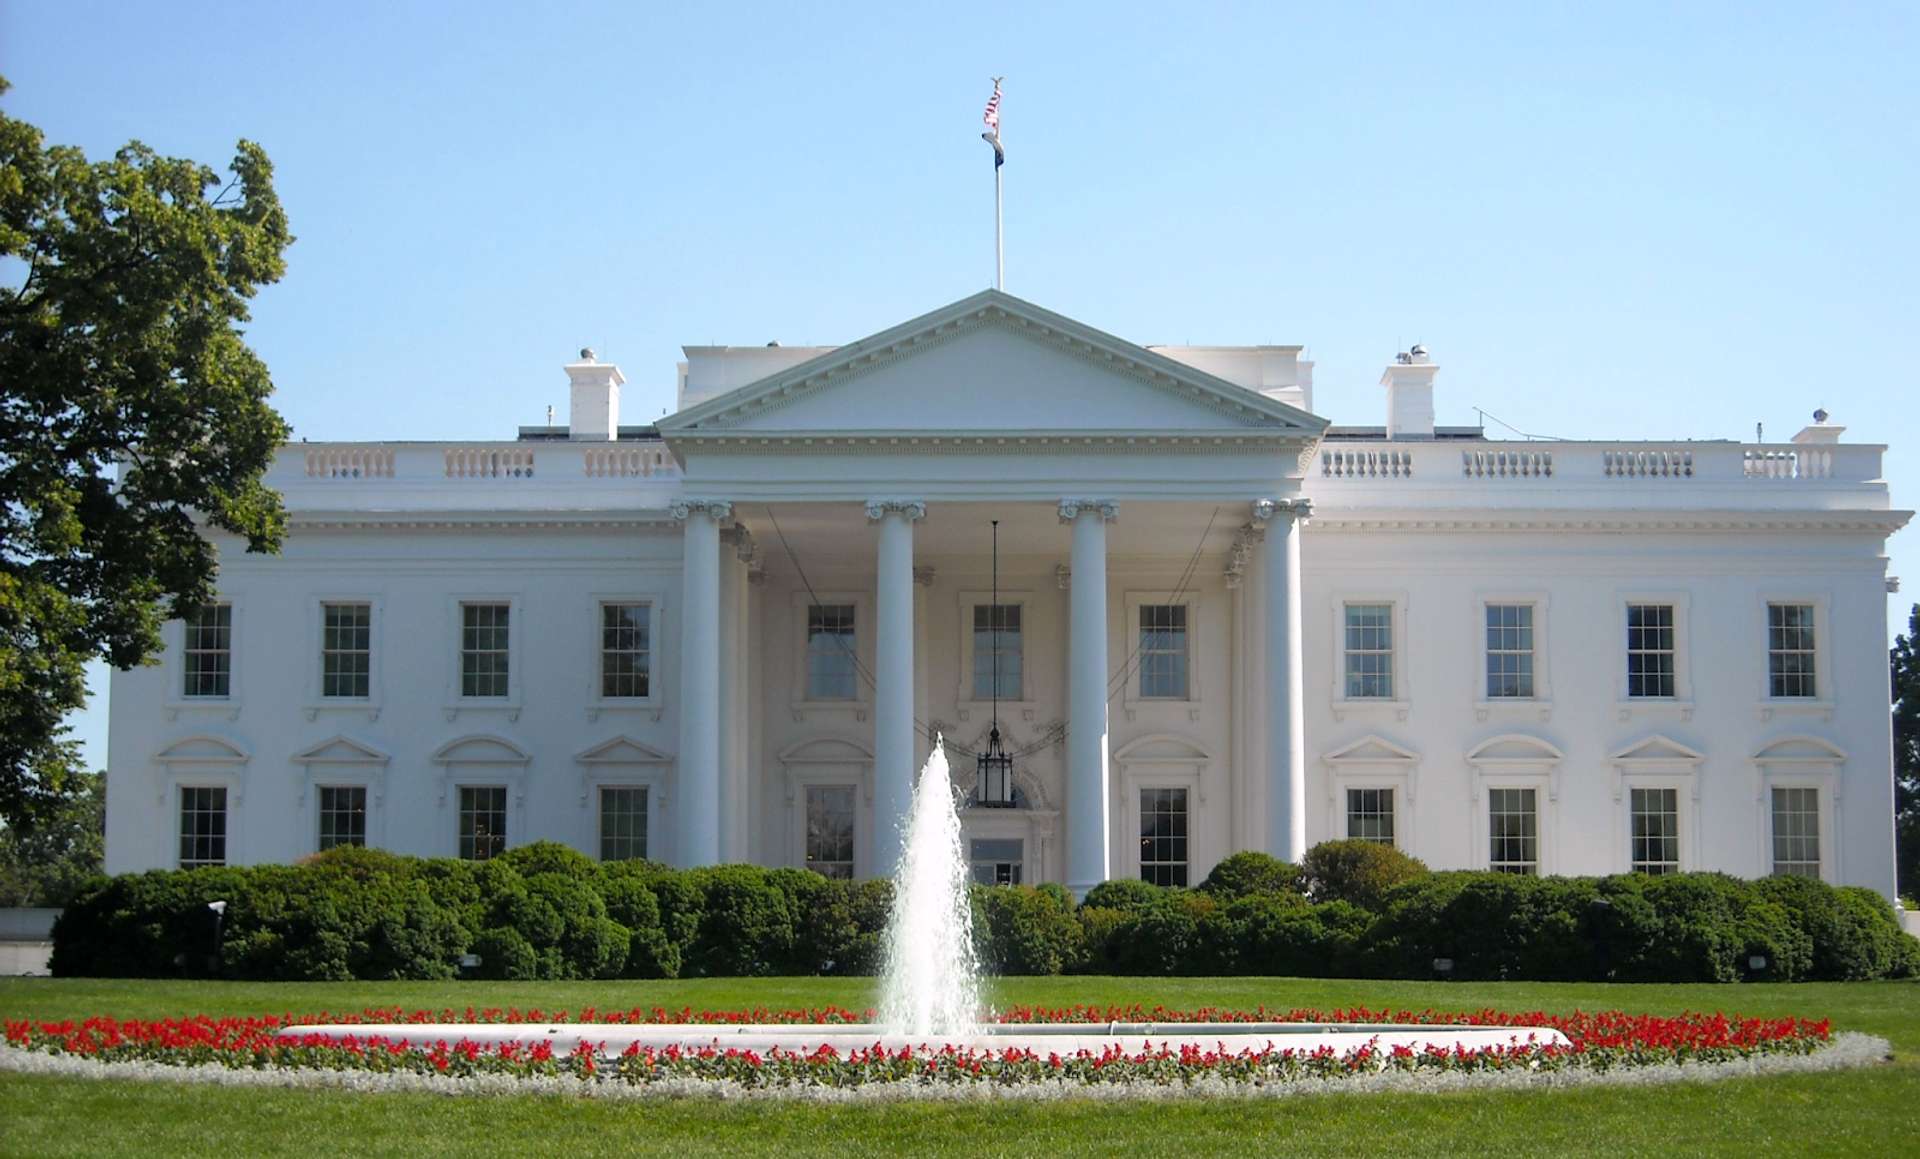 A photograph of the front of the White House.